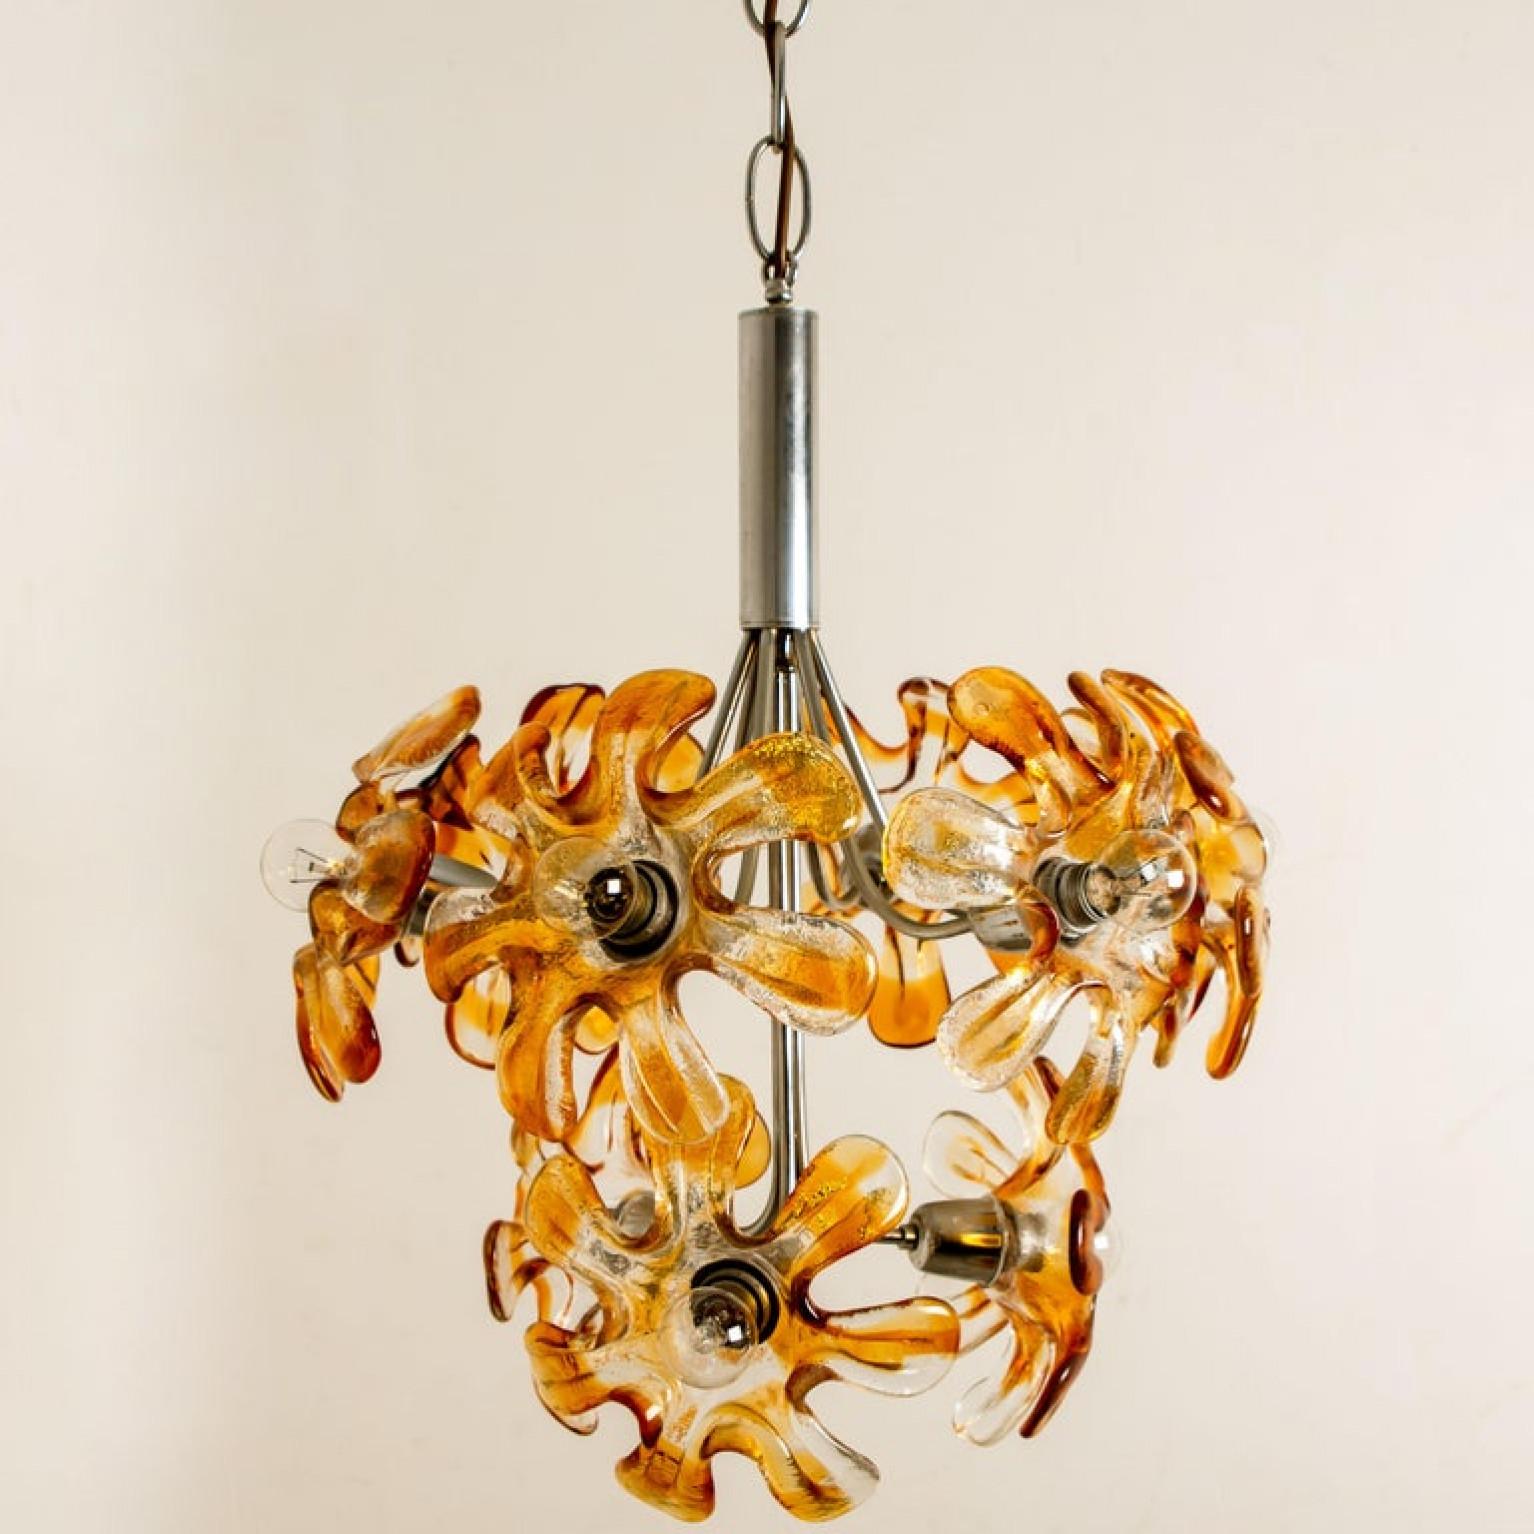 Mid-Century Modern Murano Chandelier Orange Clear Glass, Chrome, by Mazzega, 1960s For Sale